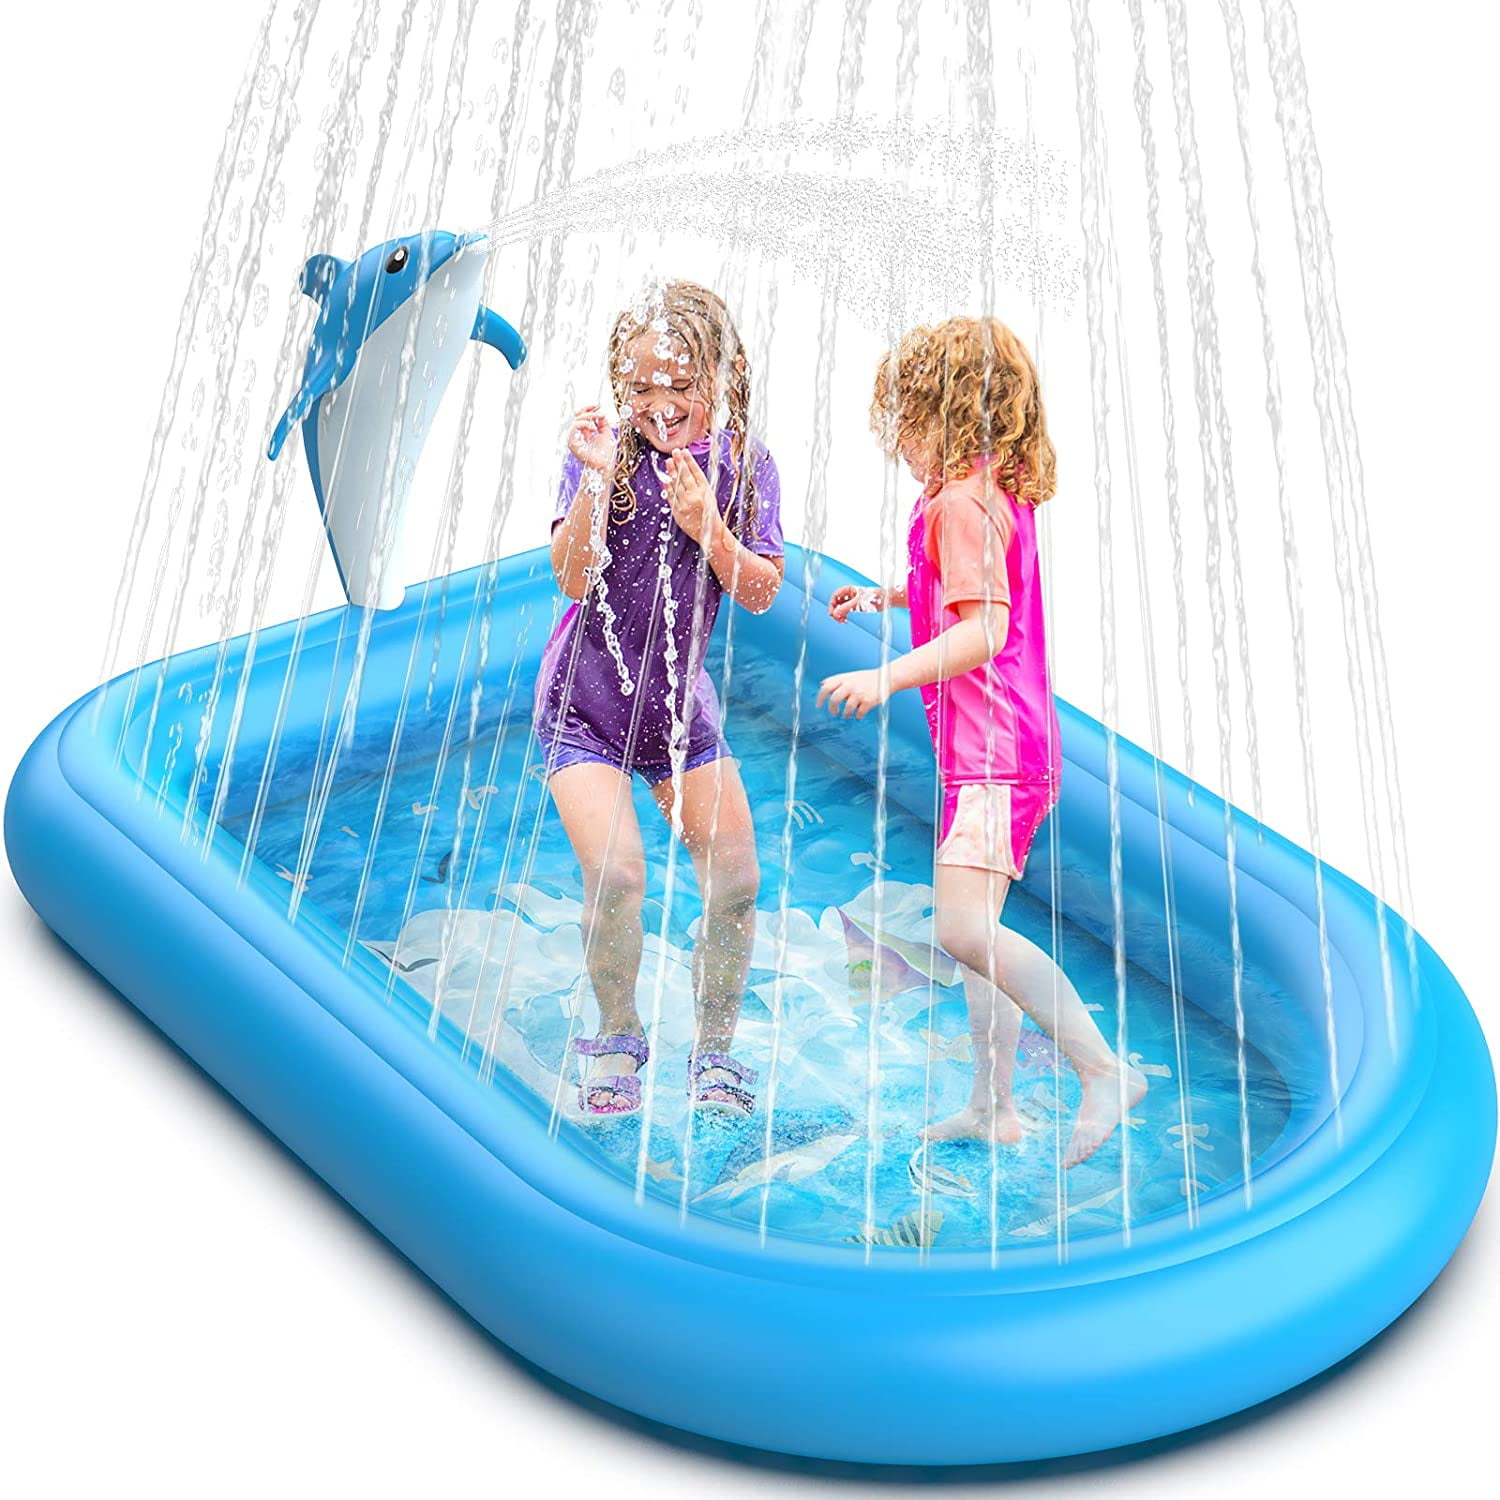 Details about   Inflatable Sprinkler Pool Water Toys Summer Outdoor Play Floating Chair 